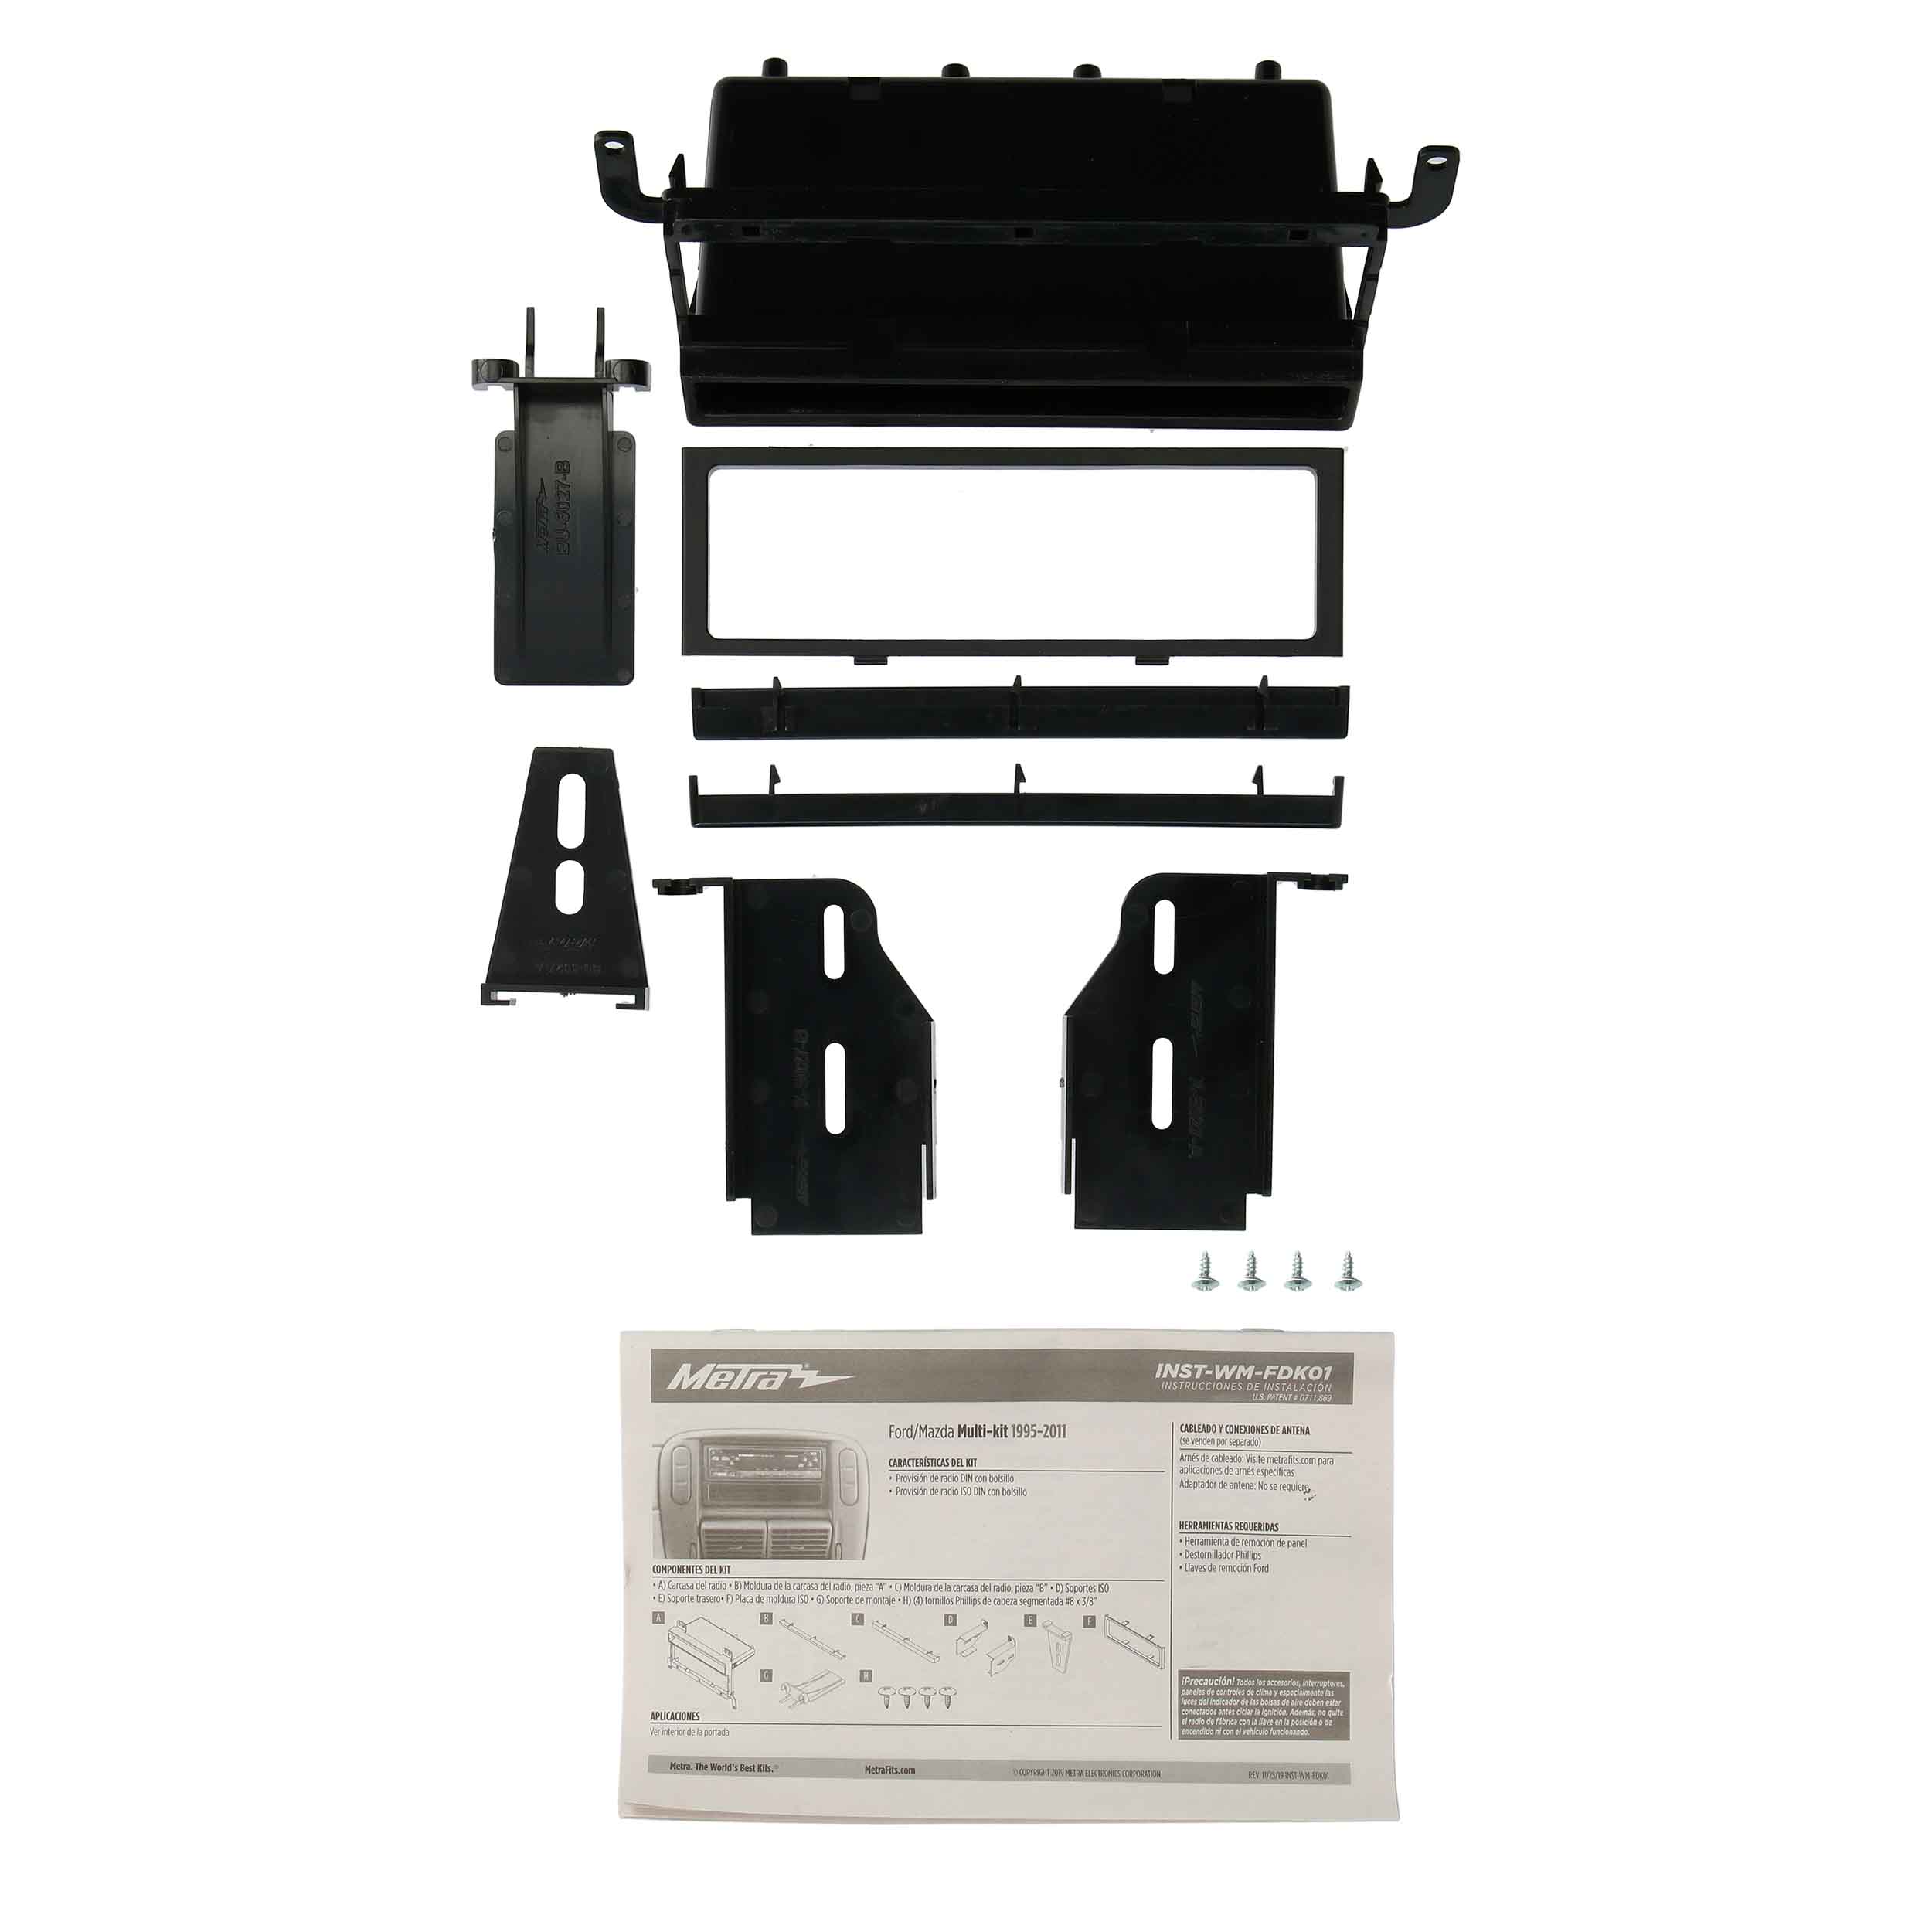 Metra WM-FDK01 Single DIN Aftermarket Radio Installation Kit for Ford Vehicles 2004-up, Black New - image 1 of 10